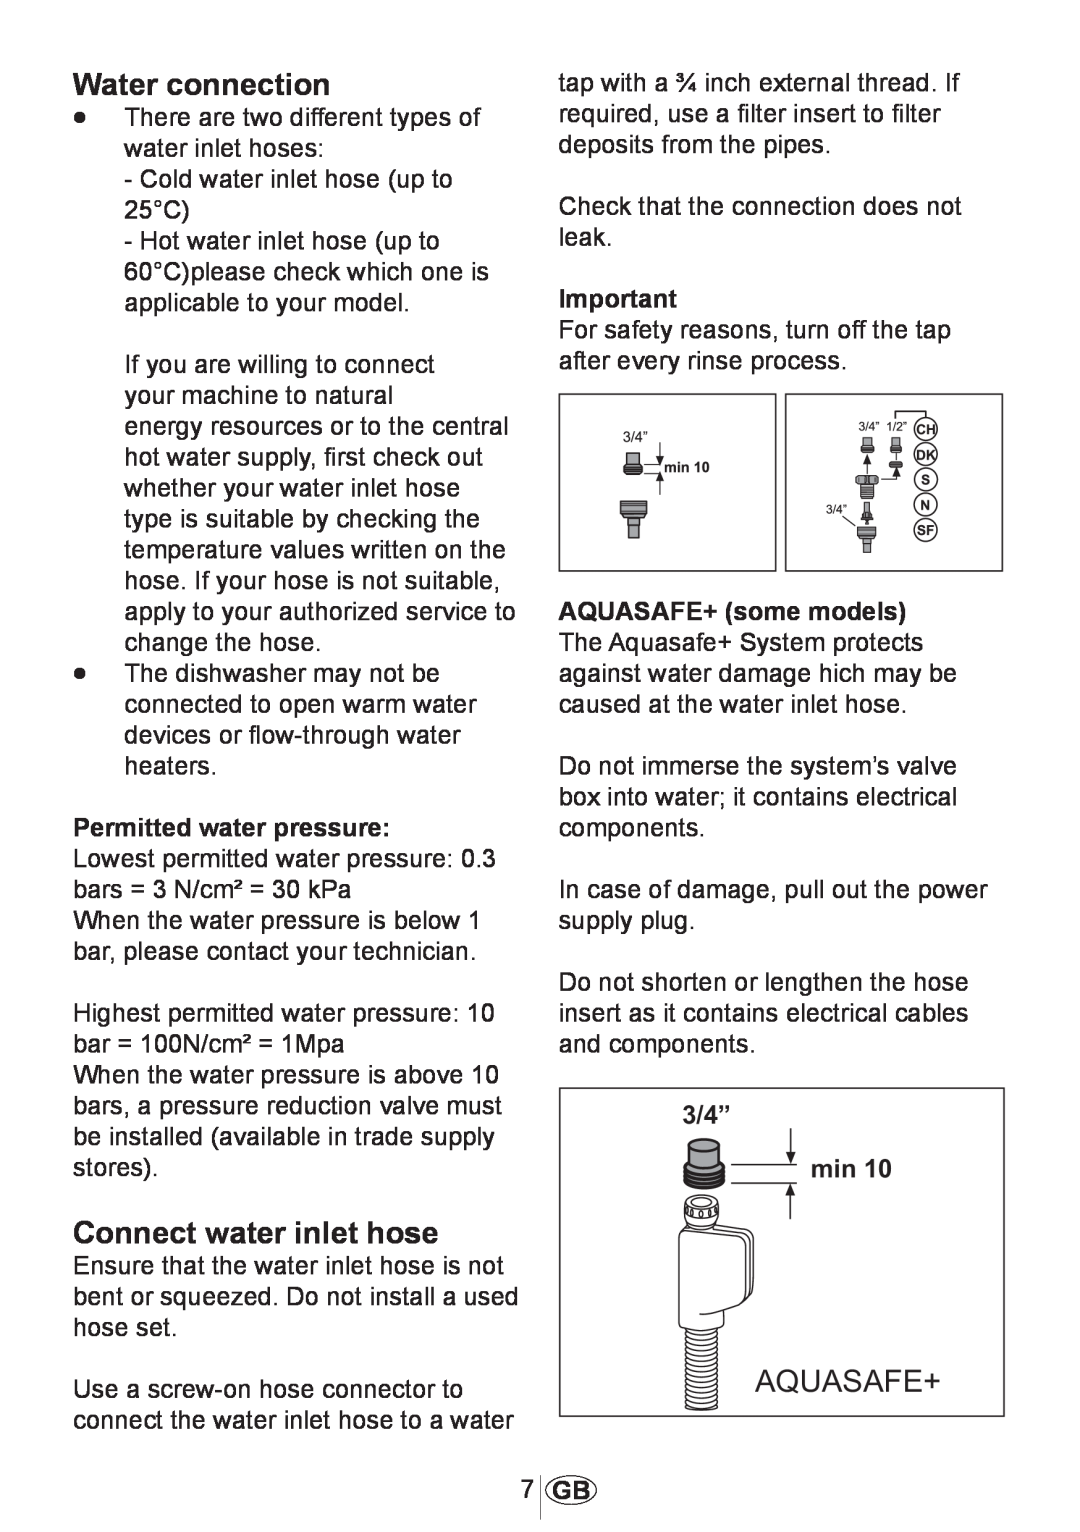 Beko 3905 MI instruction manual Water connection, Connect water inlet hose, Permitted water pressure 